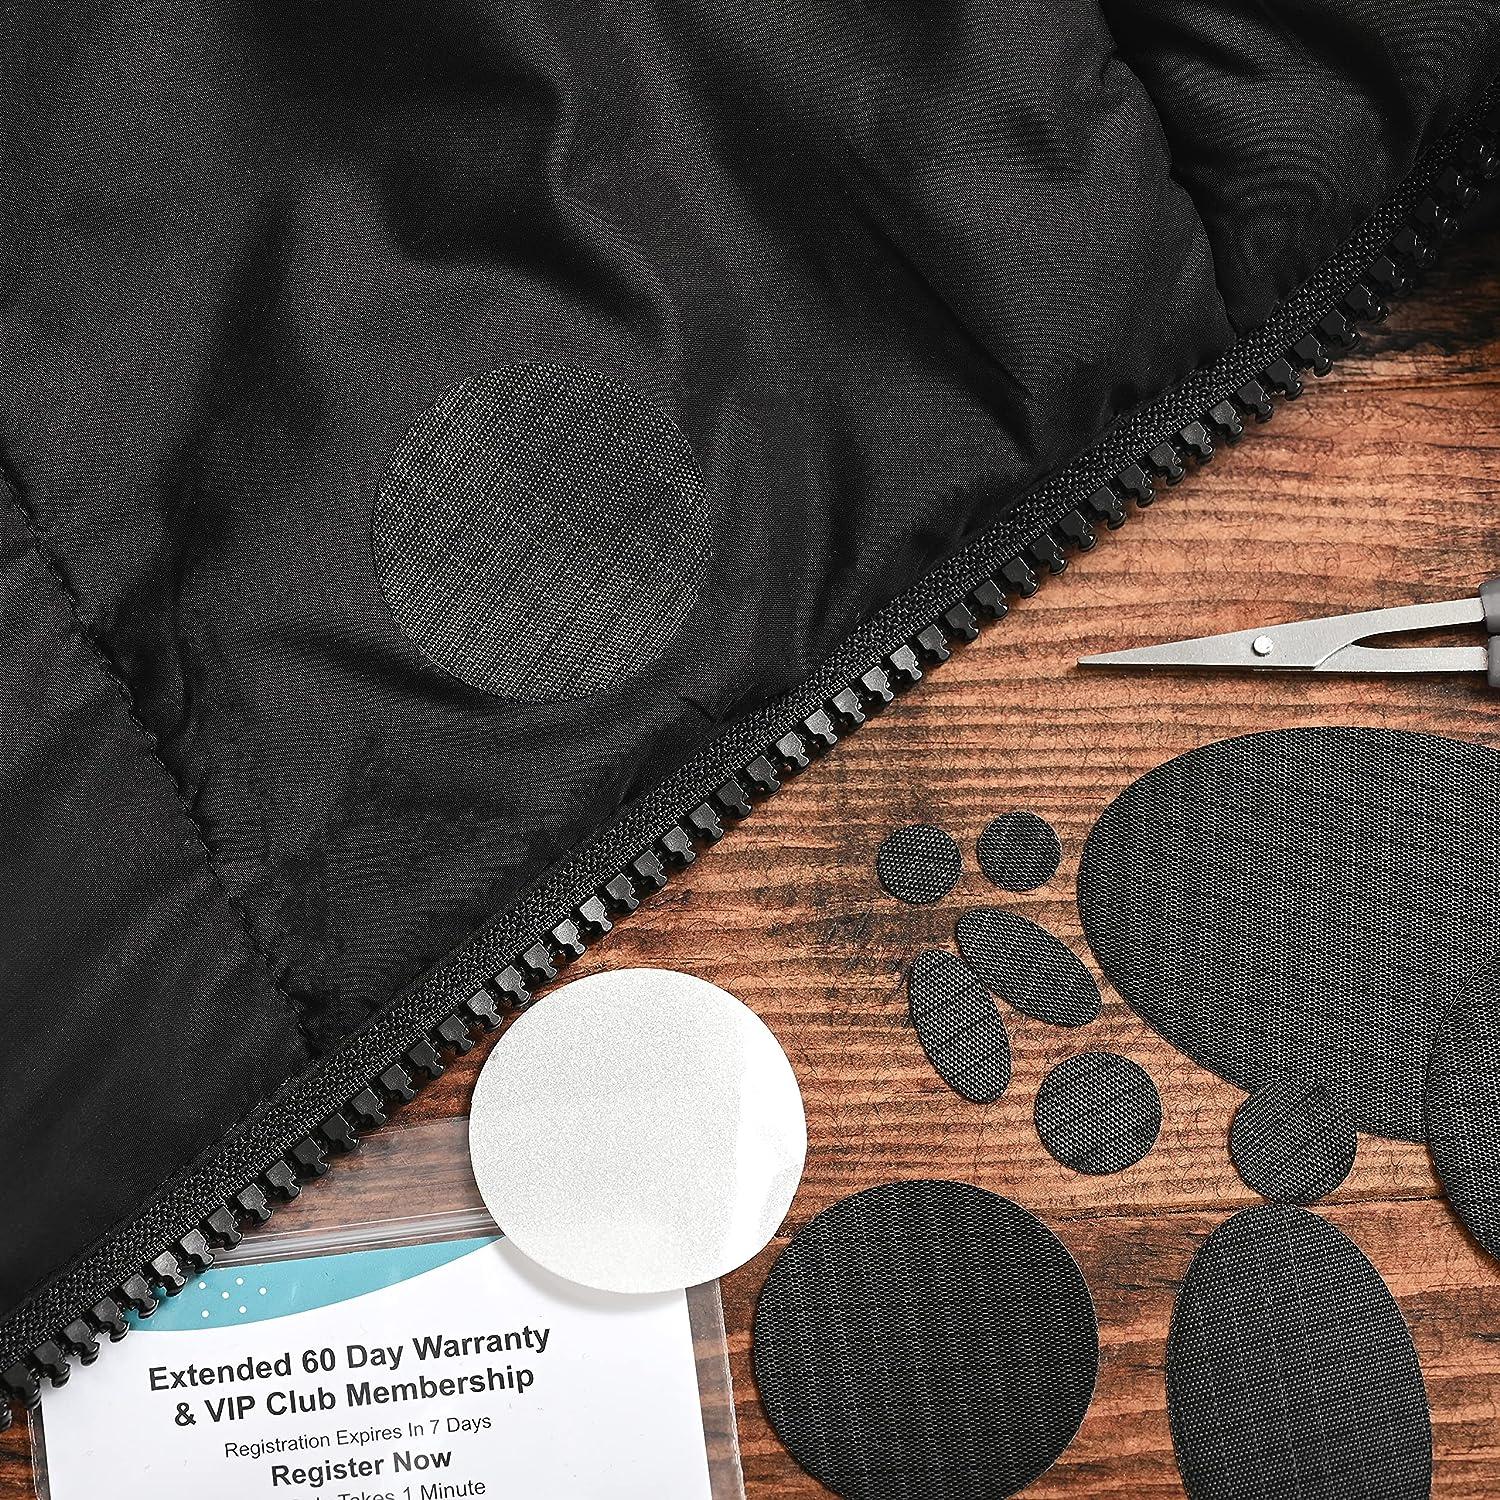  Down Jacket Repair: Self-Adhesive Repair Patches for Down  Jackets & Sleeping Bags - Easy to Use, Pre-Cut, Soft, Waterproof,  Tear-Resistant Rip-Stop Nylon - Fix Holes in Outdoor Gear (Black)